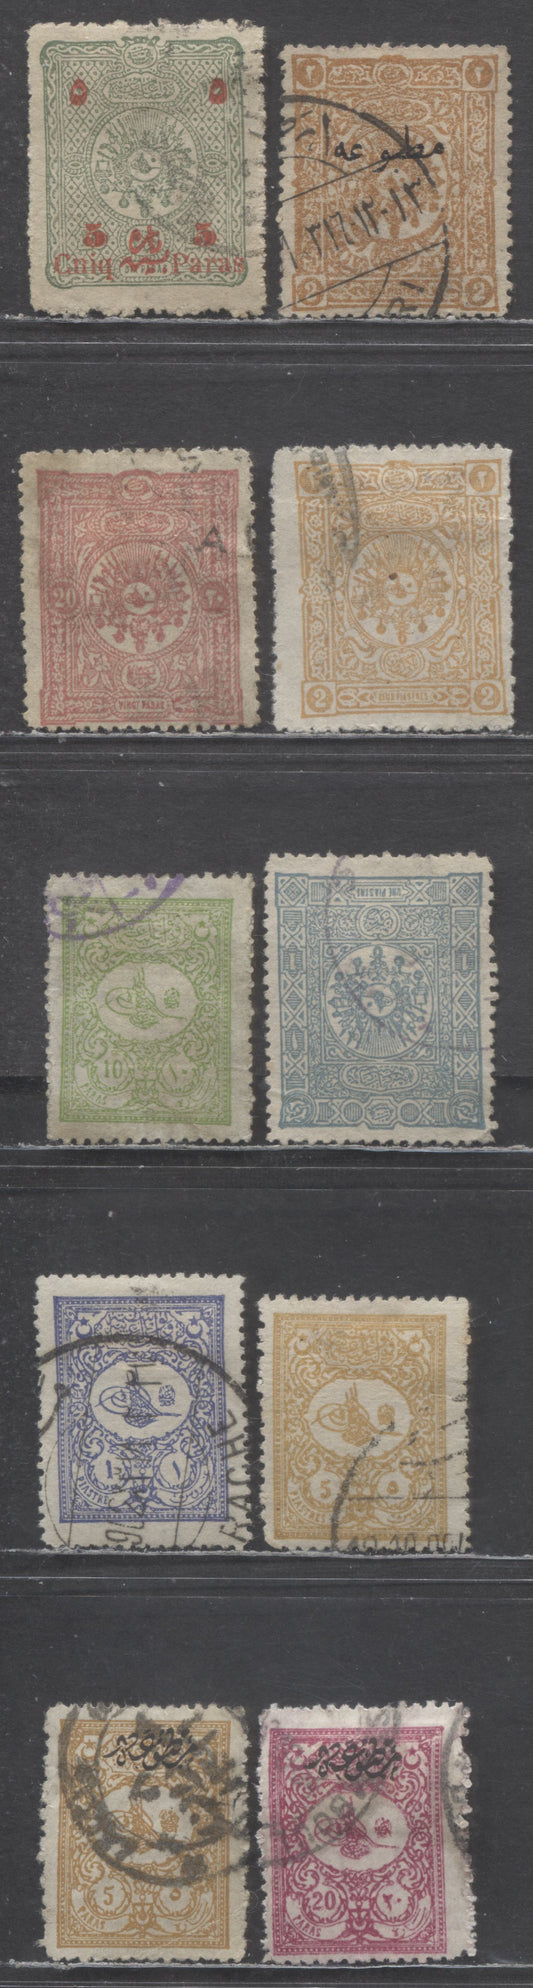 Lot 7 Turkey SC#96/p39 1892-1901 Arms, Tugha & Newspaper Overprints, 10 Fine/Very Fine Used Singles, Click on Listing to See ALL Pictures, Estimated Value $20